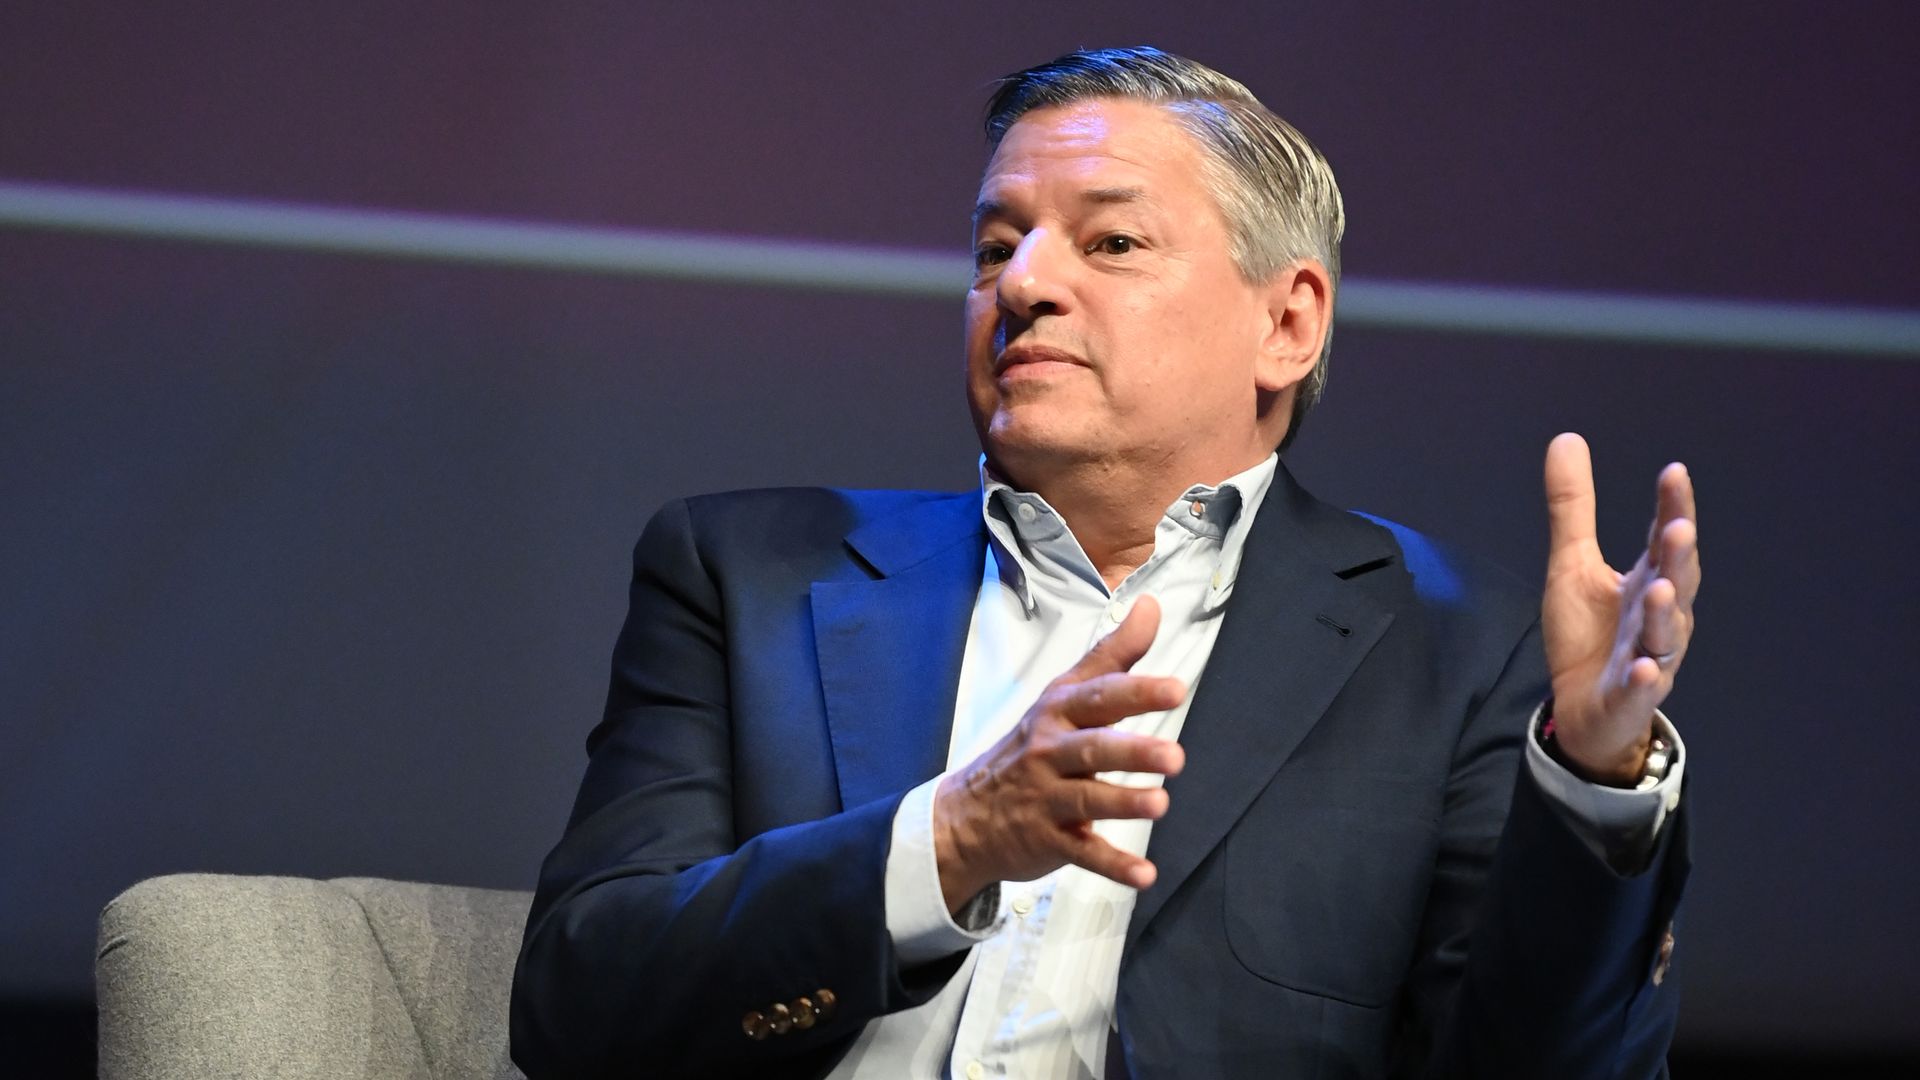 Ted Sarandos onstage during the Netflix's Ted Sarandos on the Future of Entertainment session at the Lumiere Theatre in Cannes.